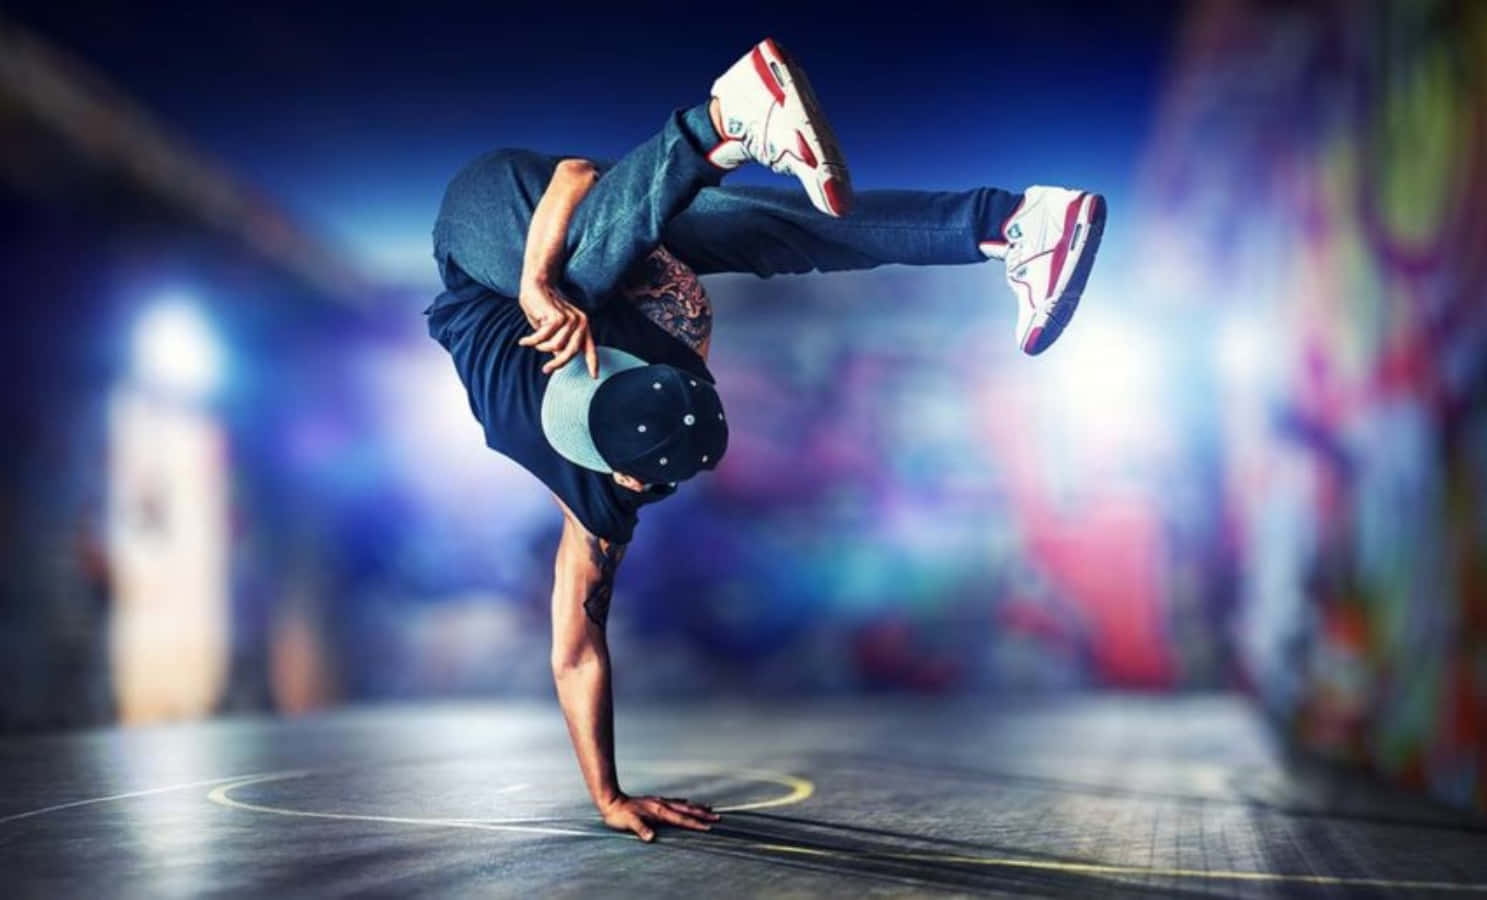 A Man Doing A Handstand In A Dark Area